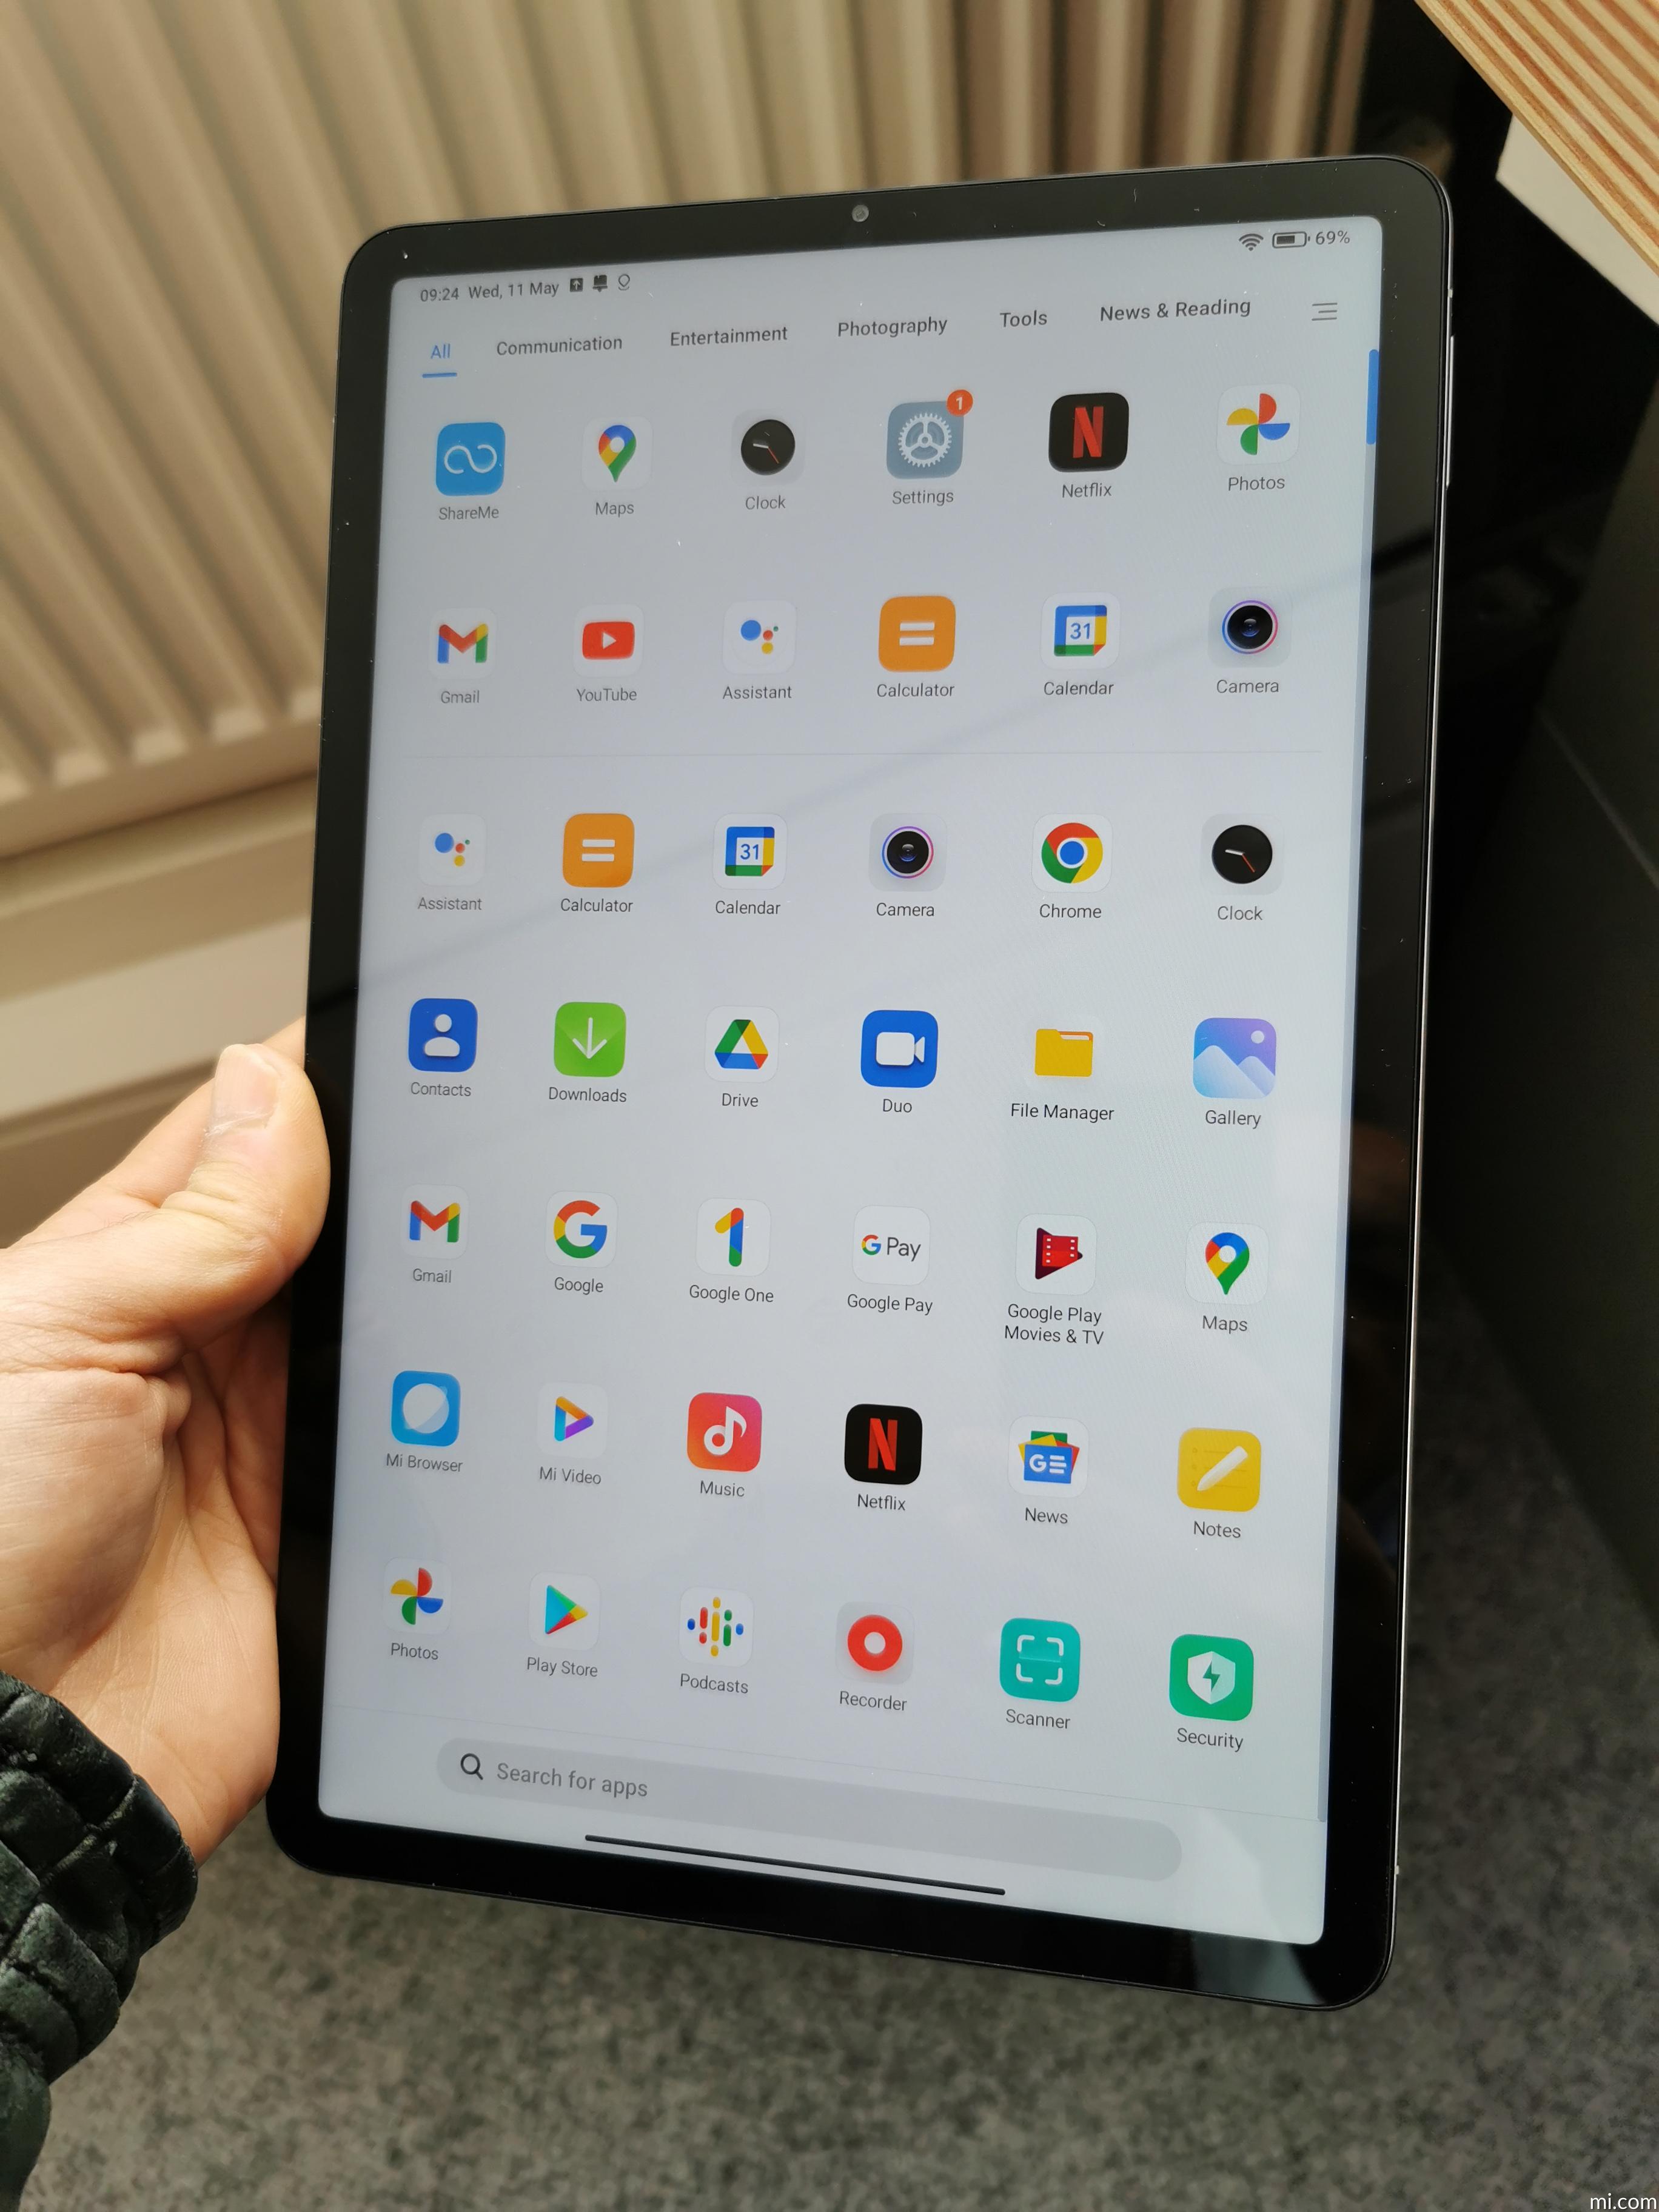 Xiaomi Pad 5 Review: High-end specs at a great price